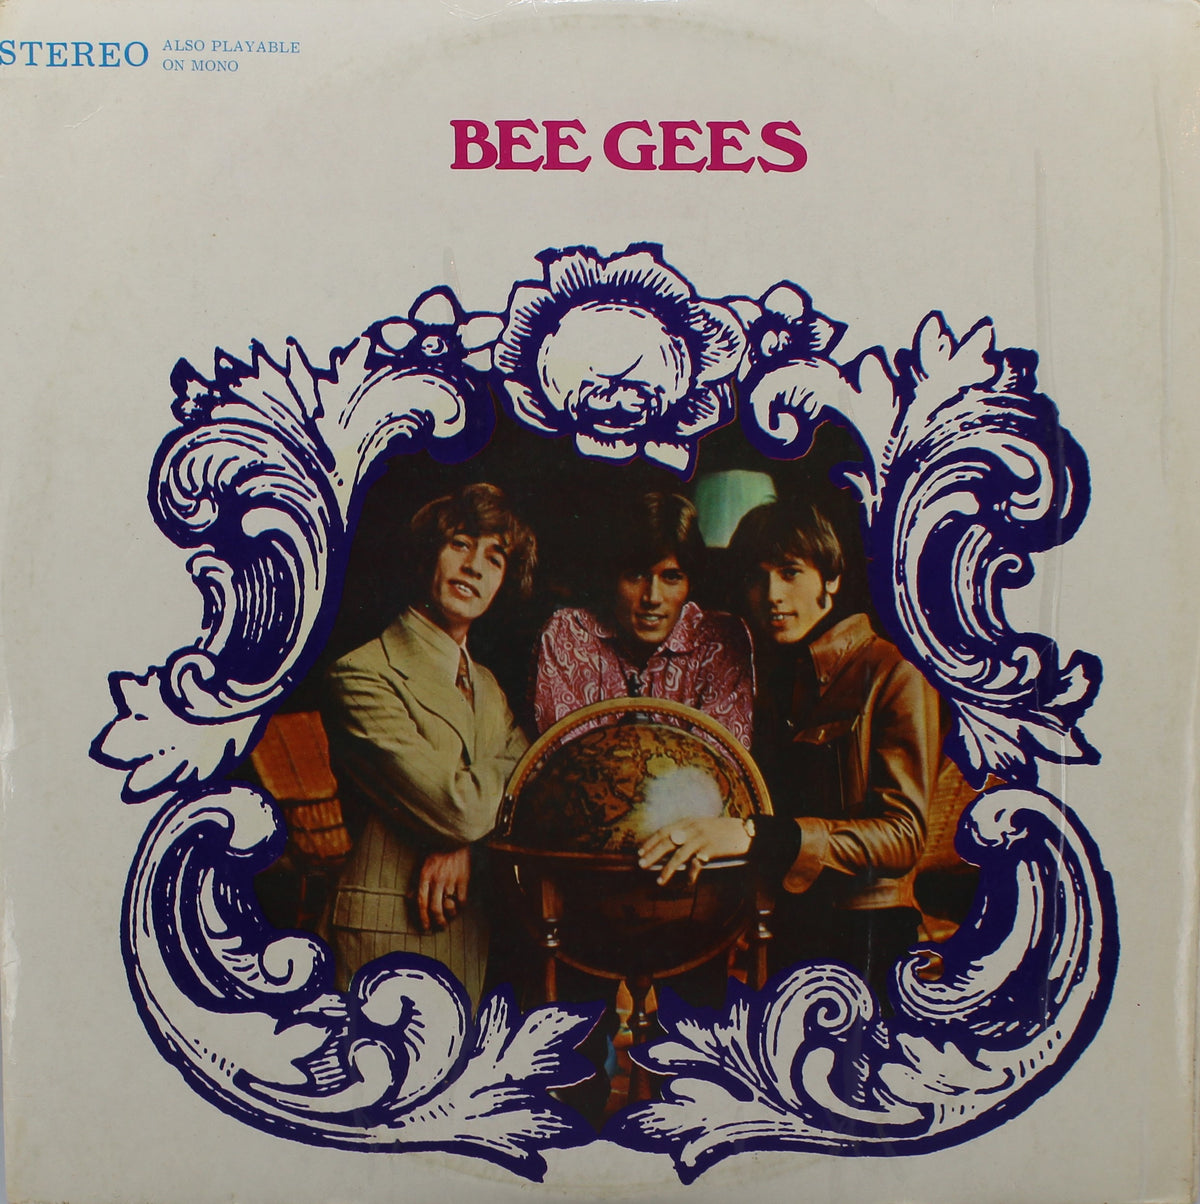 Bee Gees – Bee Gees, Vinyl, LP, Compilation, Unofficial Release, Stereo, Mono, Black Label, Japan